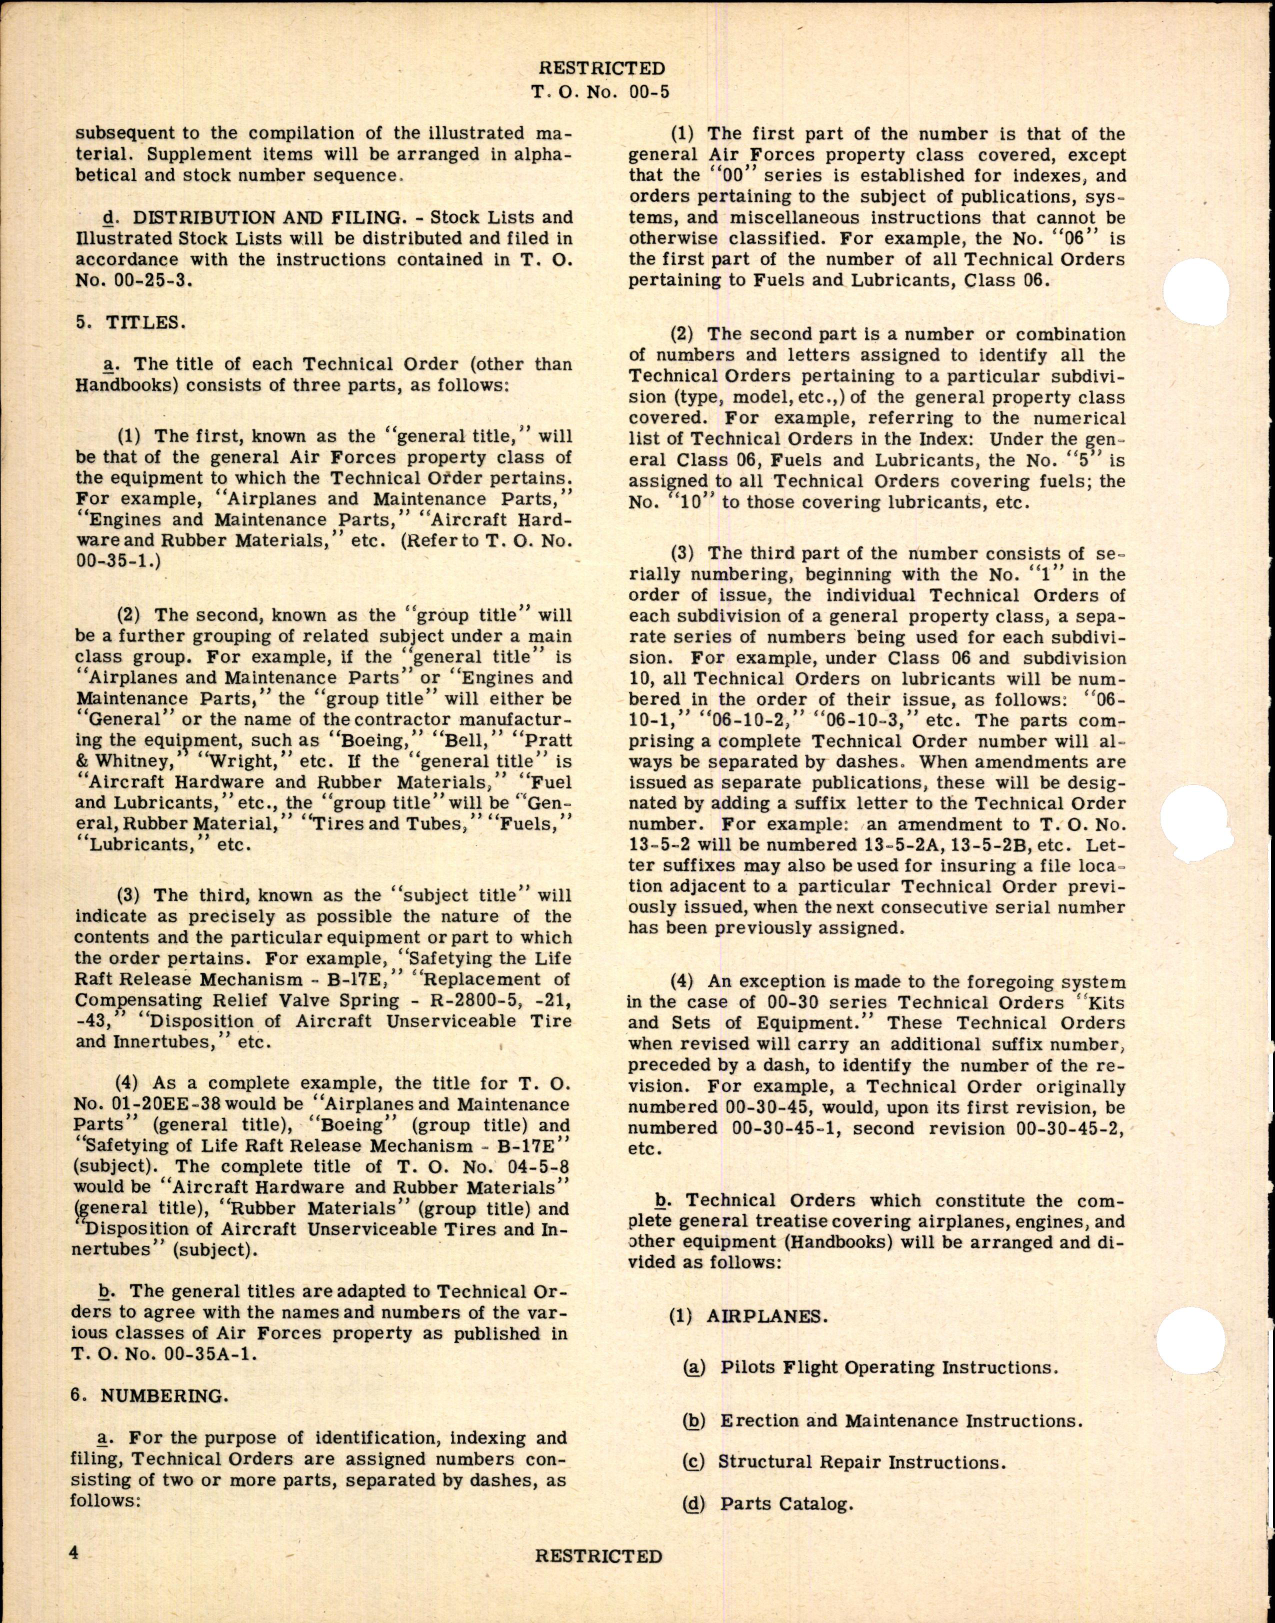 Sample page 4 from AirCorps Library document: Explanation of Technical Order & Stock List System